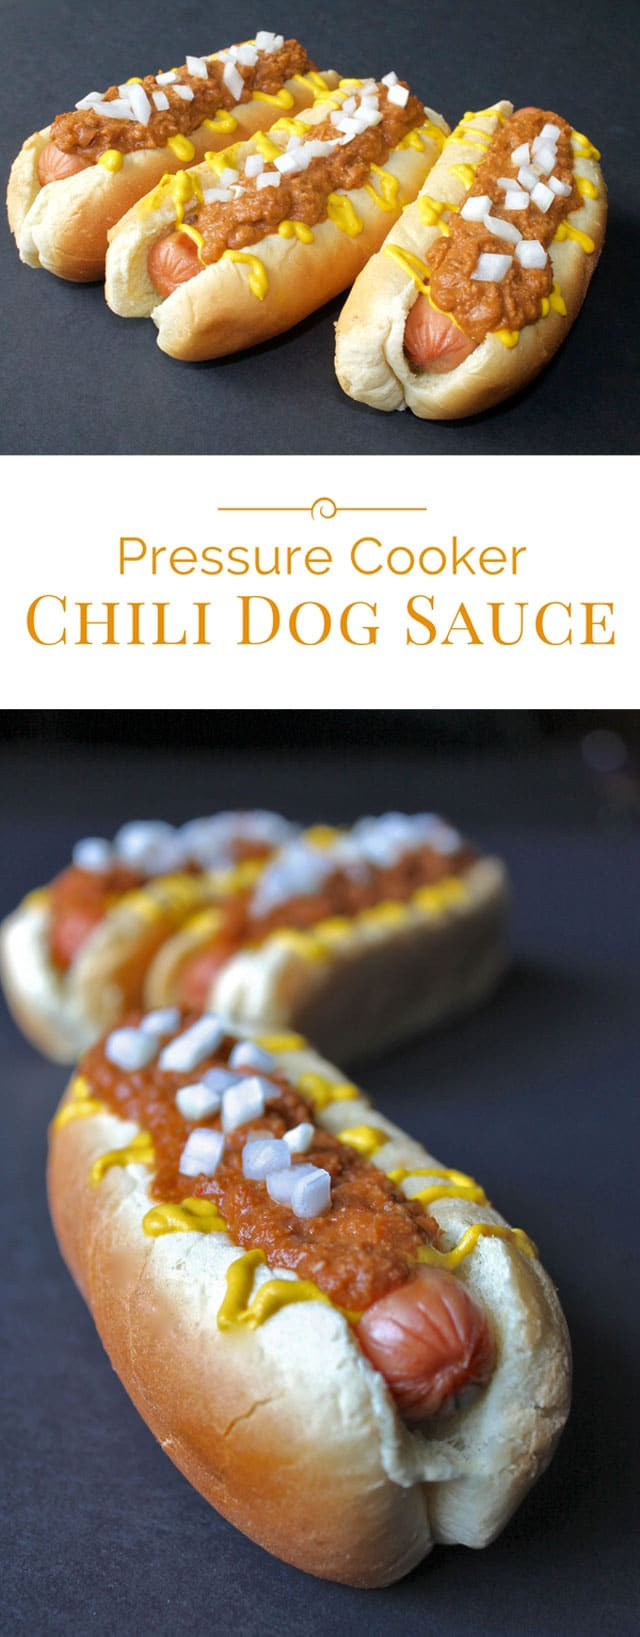 Pressure Cooker Hot Dogs
 Electric Pressure Cooker Instant Pot Old Fashioned Chili